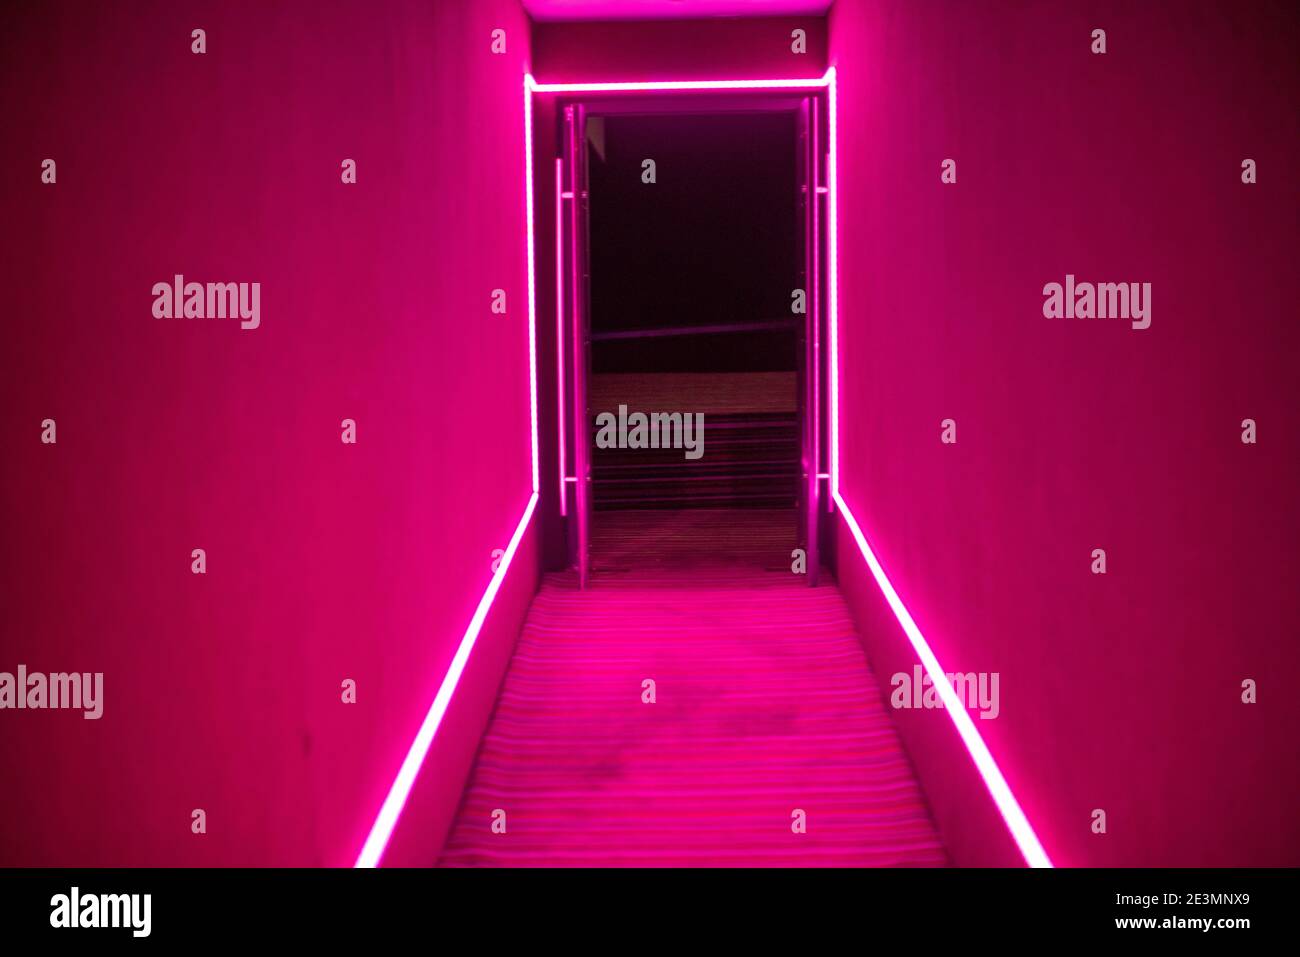 Brightly lit pink neon colors on inside of room Stock Photo